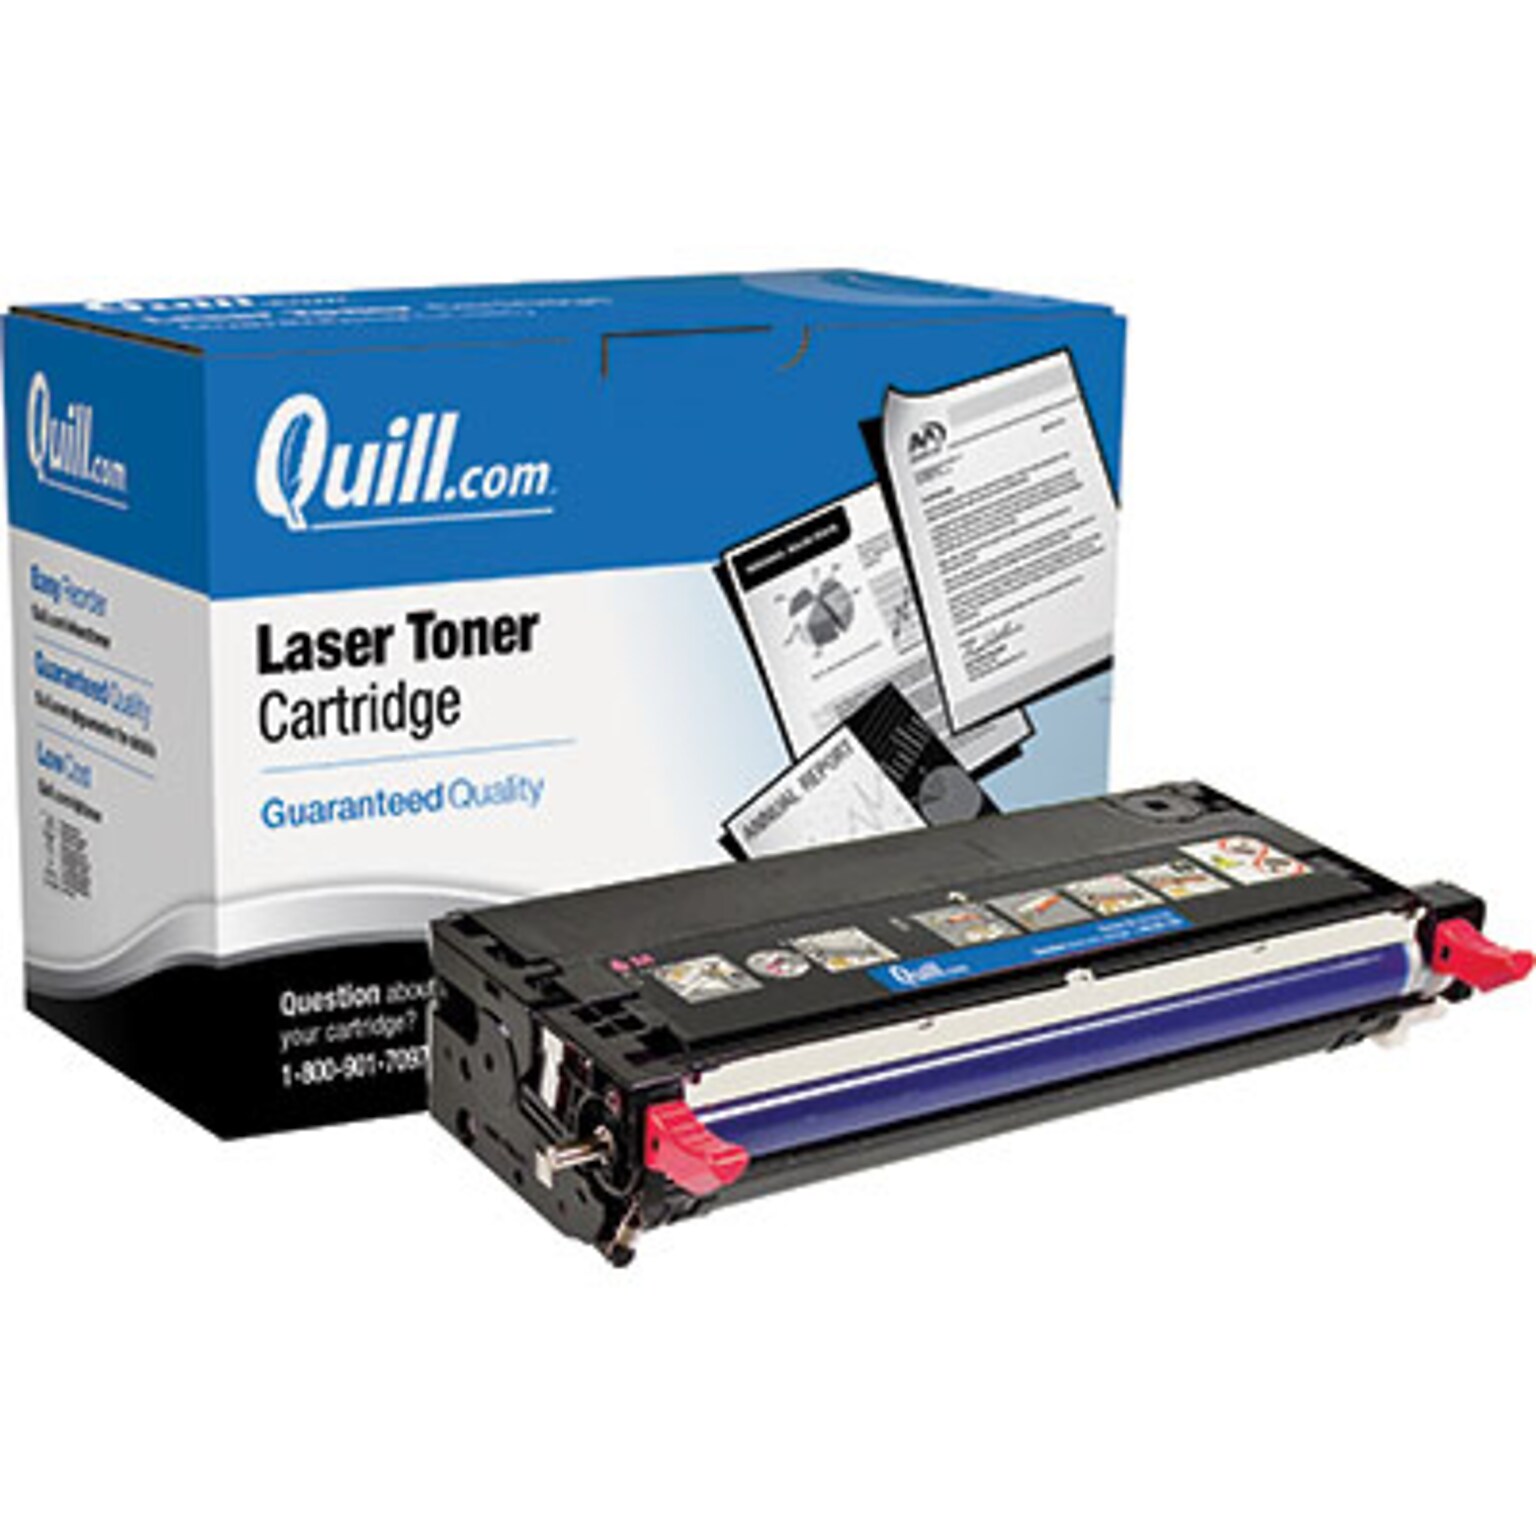 Quill Brand Remanufactured Laser Toner Cartridge Comparable to Dell H514C High Yield Magenta (100% Satisfaction Guaranteed)